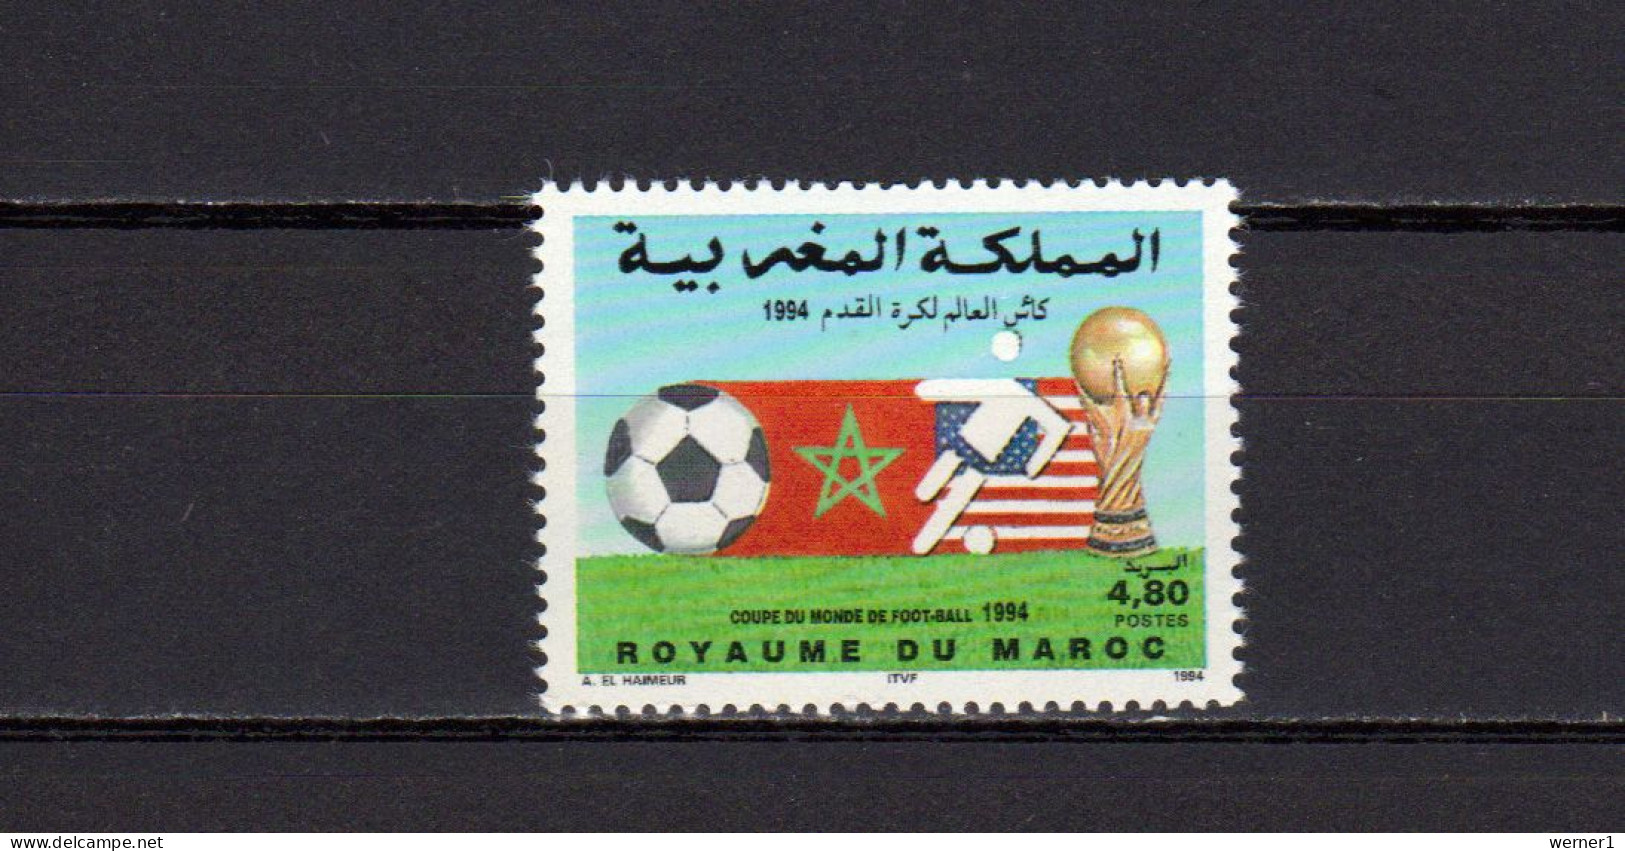 Morocco 1994 Football Soccer World Cup Stamp MNH - 1994 – Vereinigte Staaten